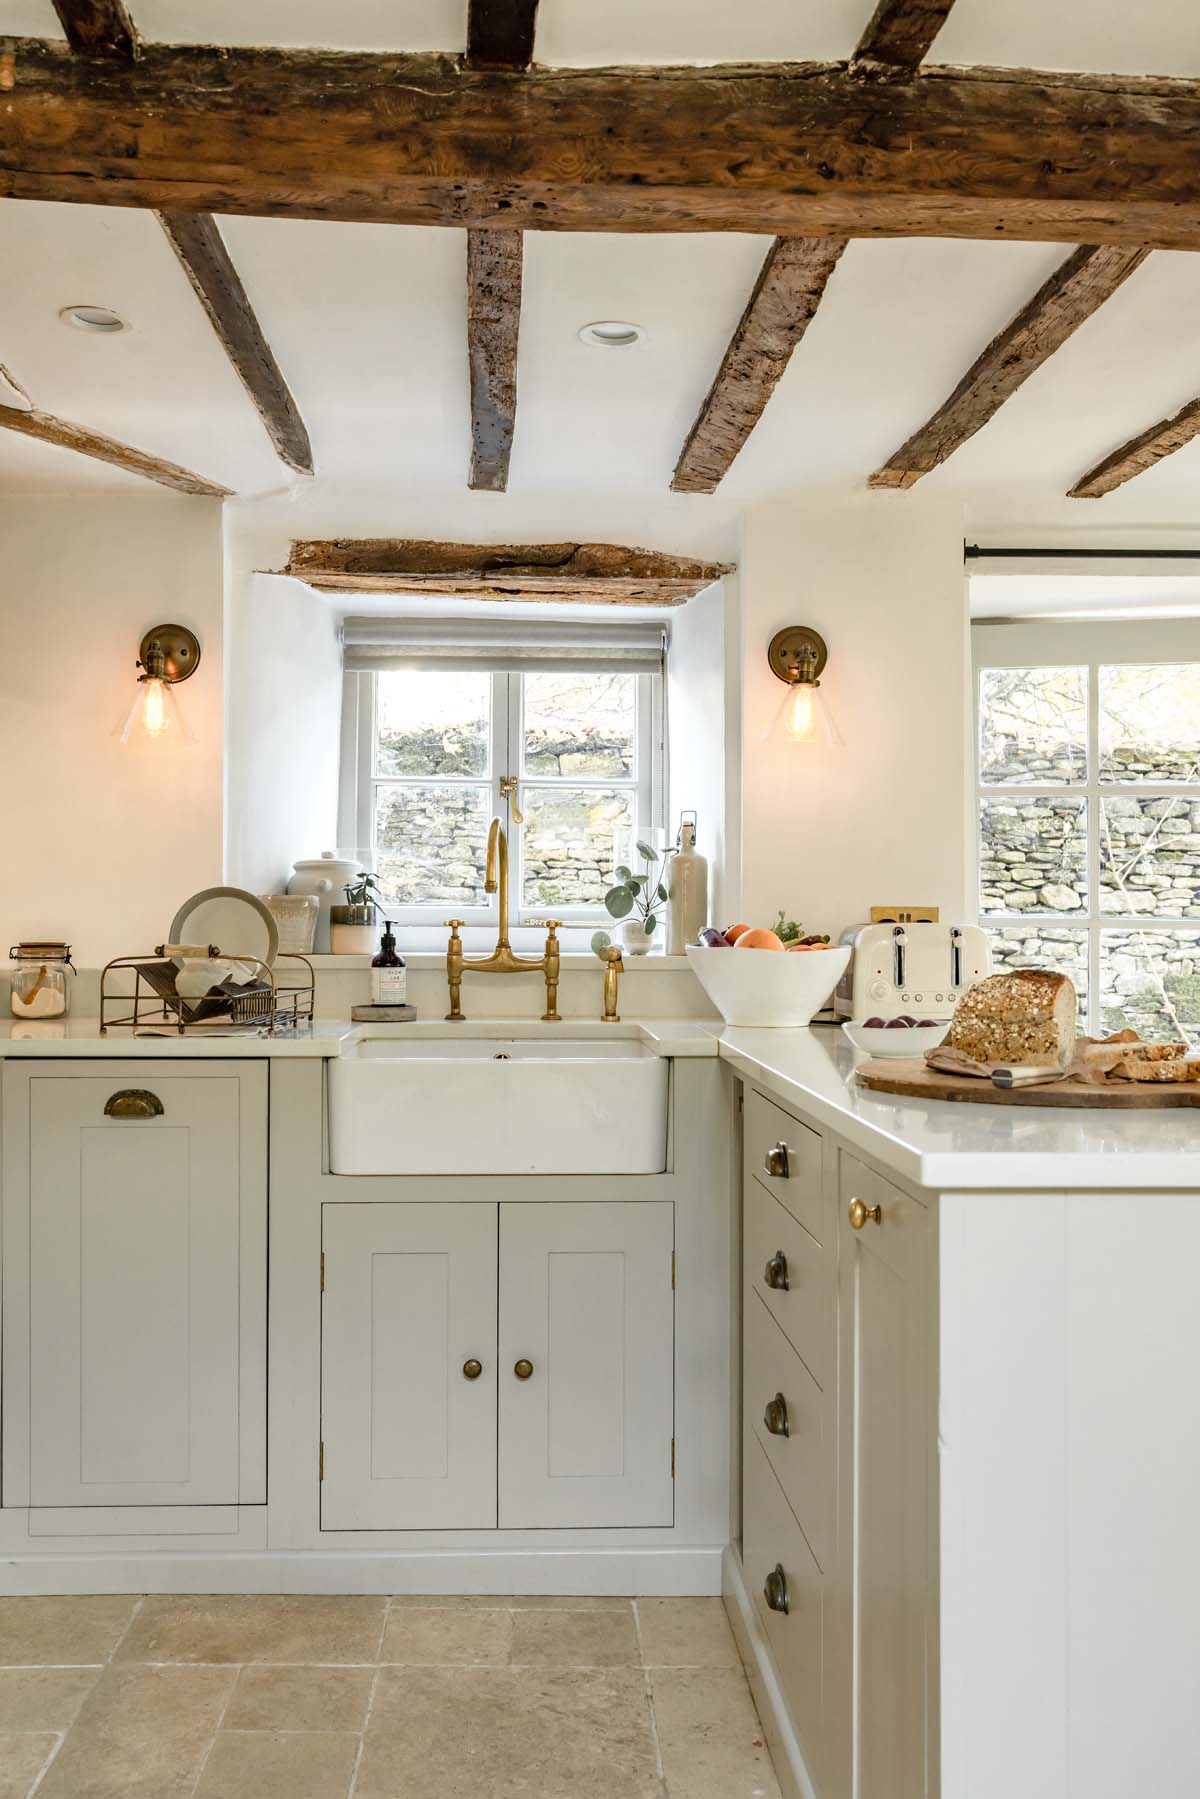 farmhouse style sink and kitchen cabinets with wooden ceiling beams above